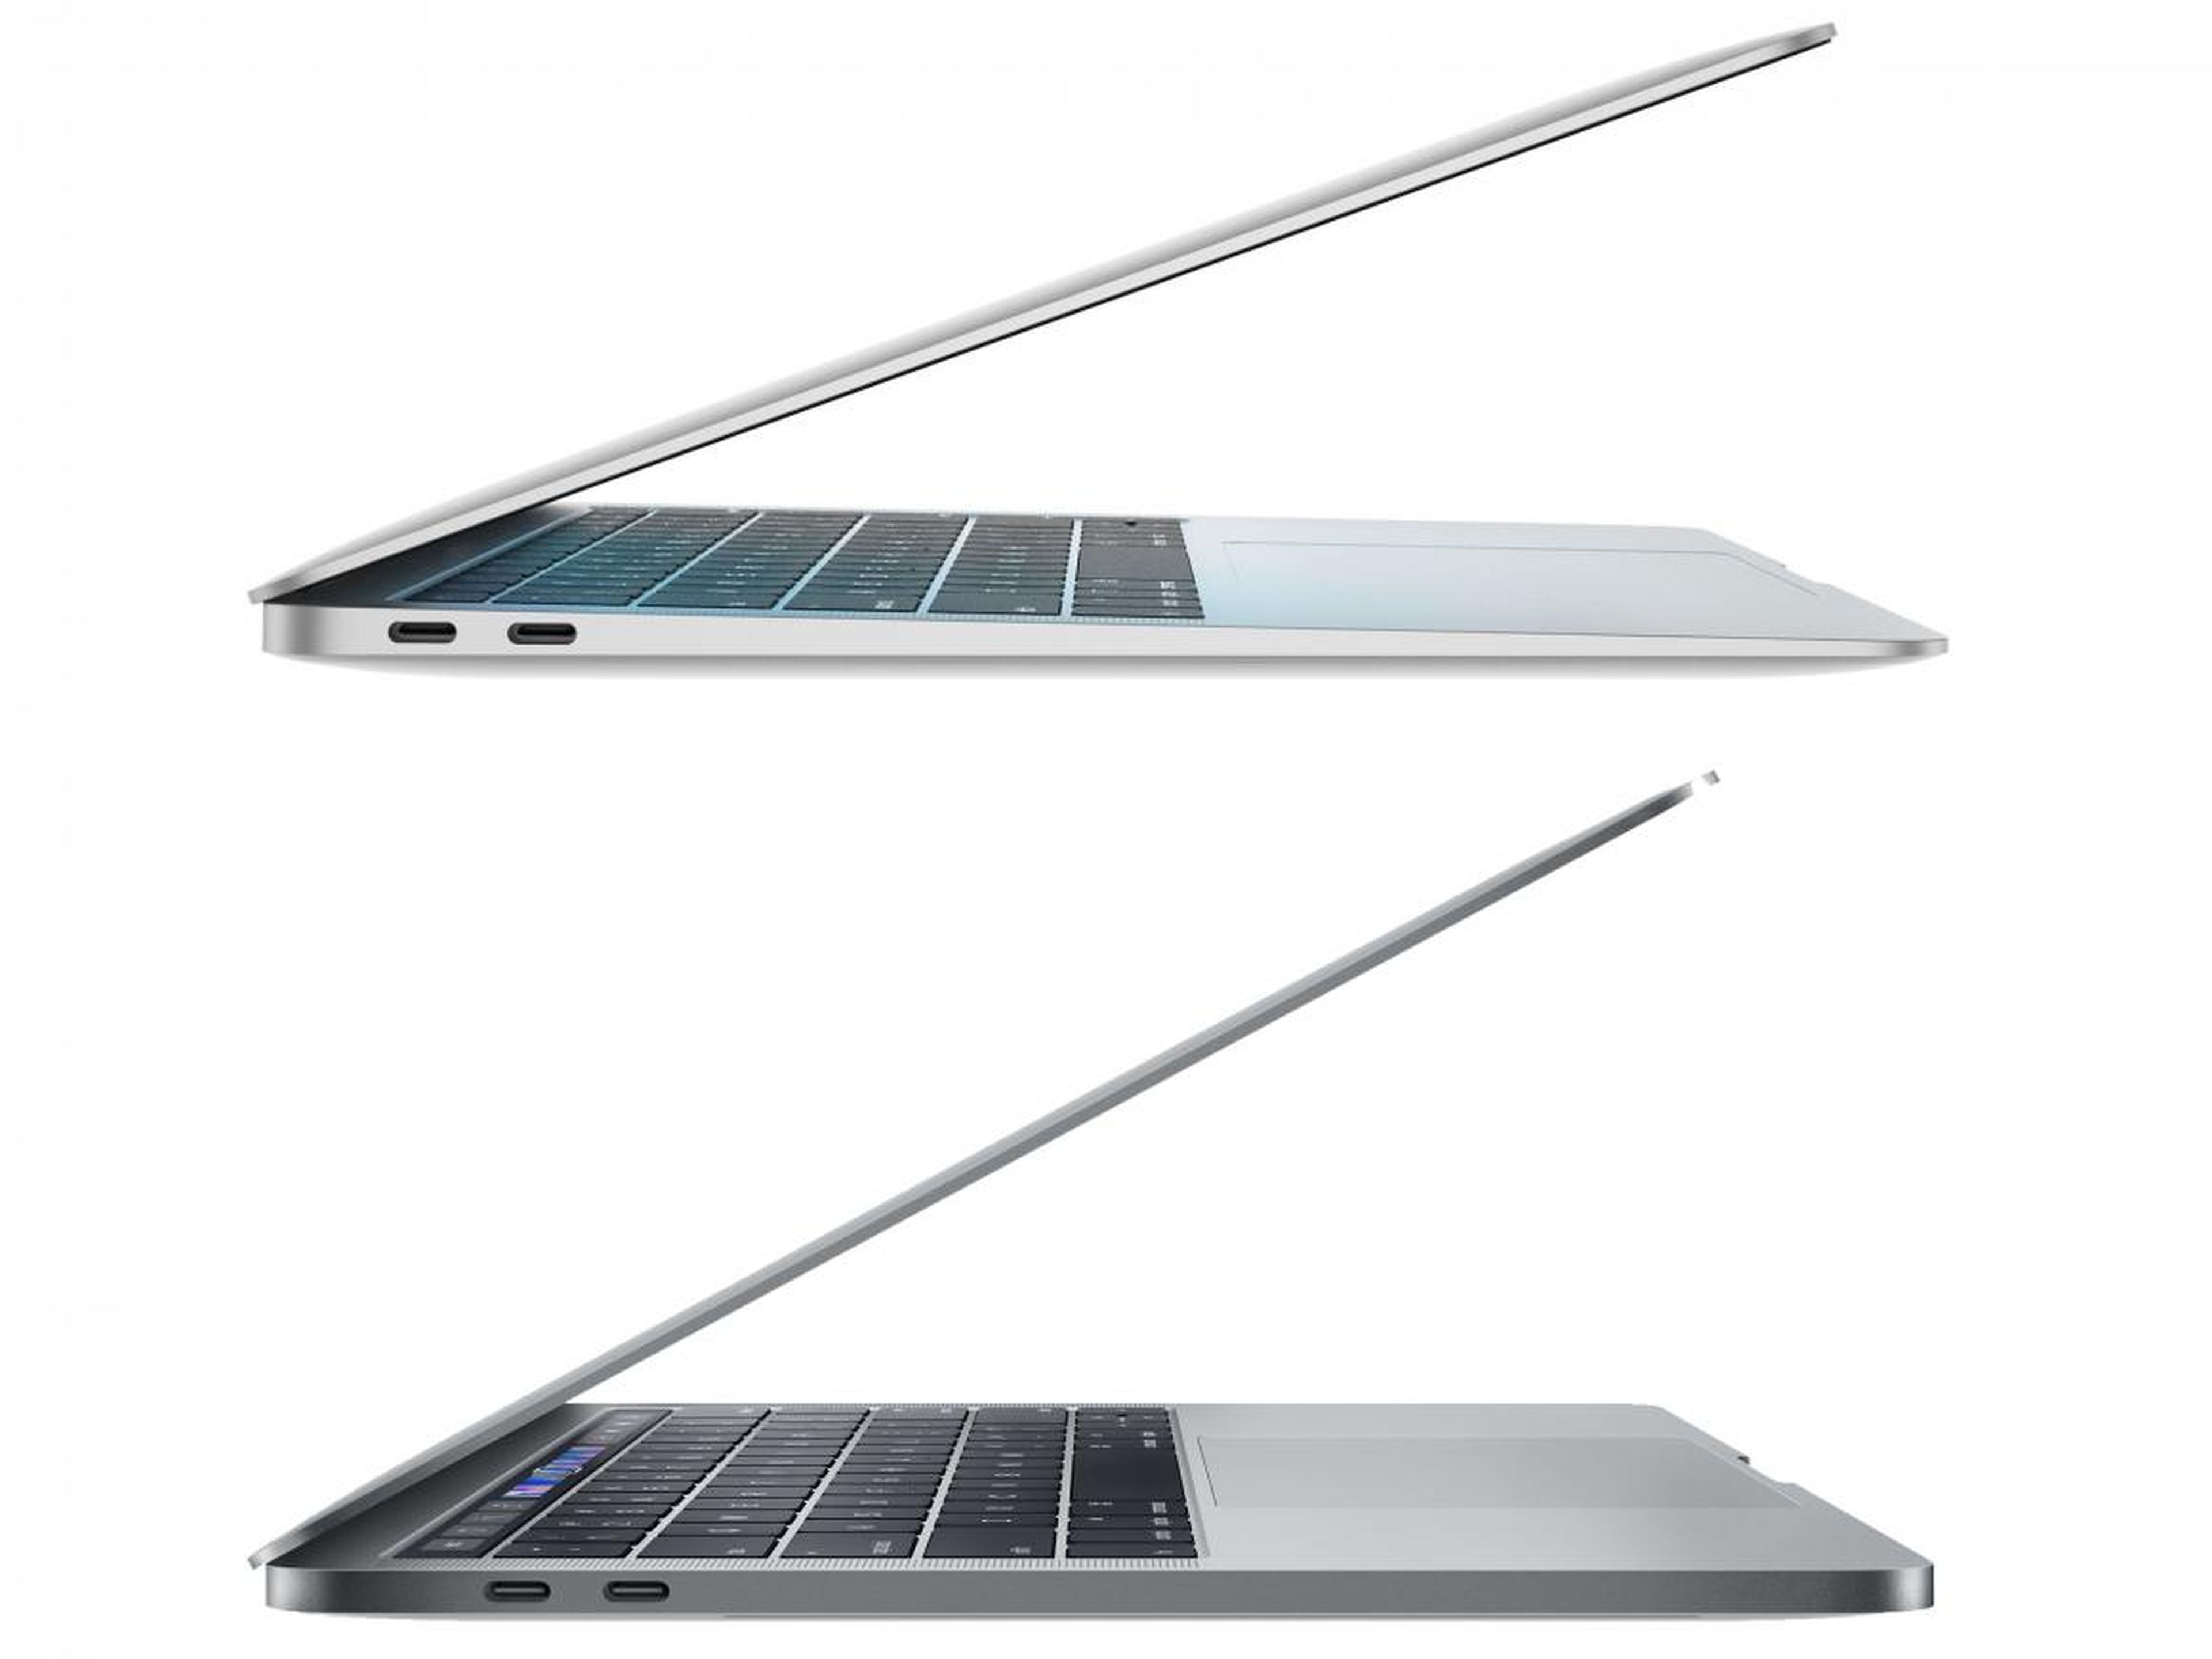 The MacBook Pro is actually slightly thinner than the MacBook Air at its thickest point.